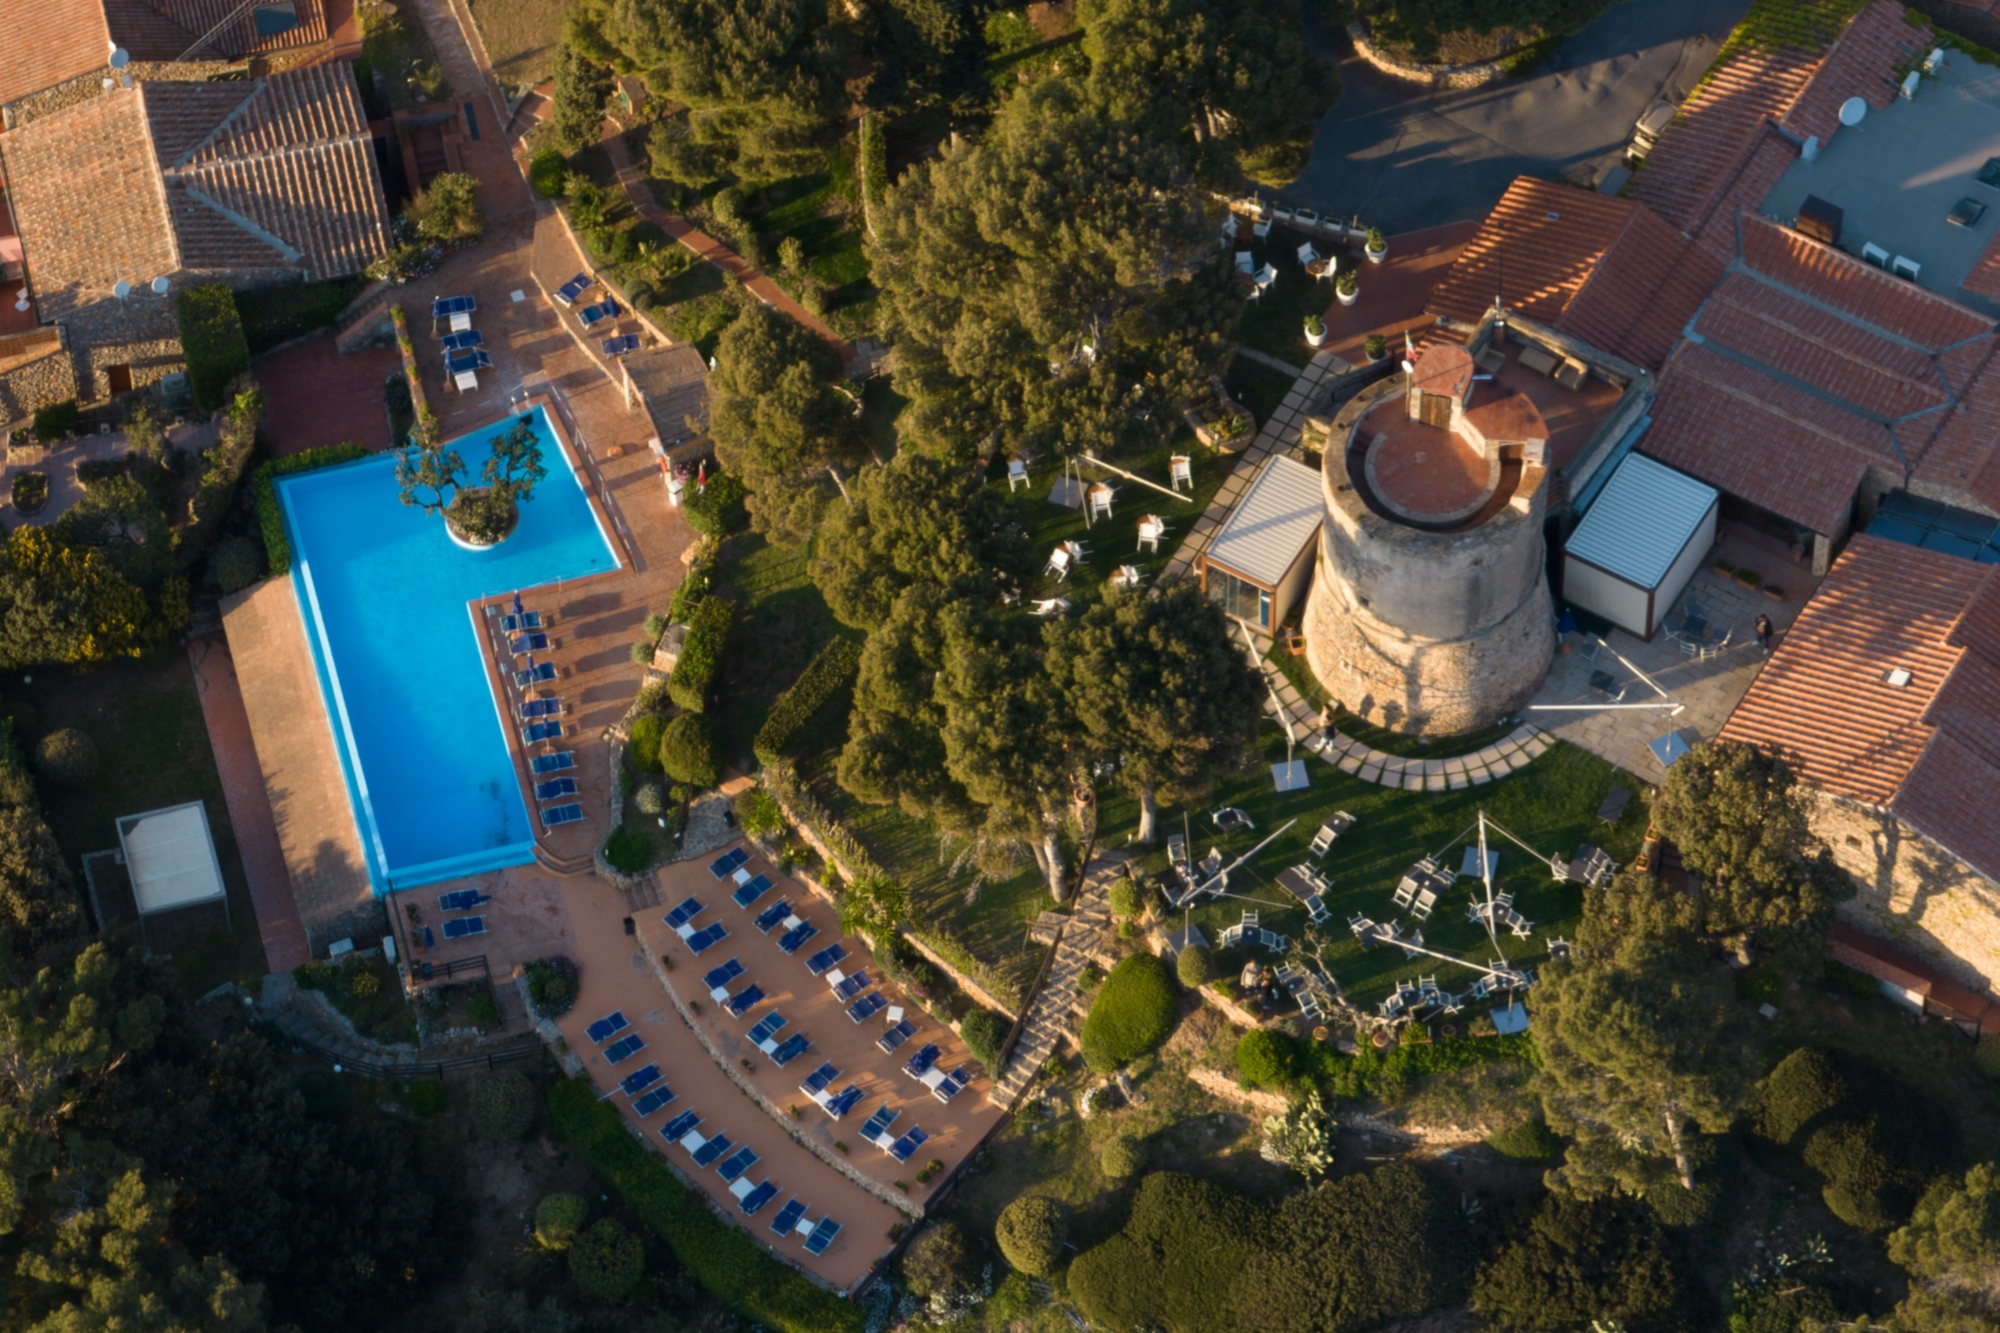 Boutique Hotel Torre di Cala Piccola from the top